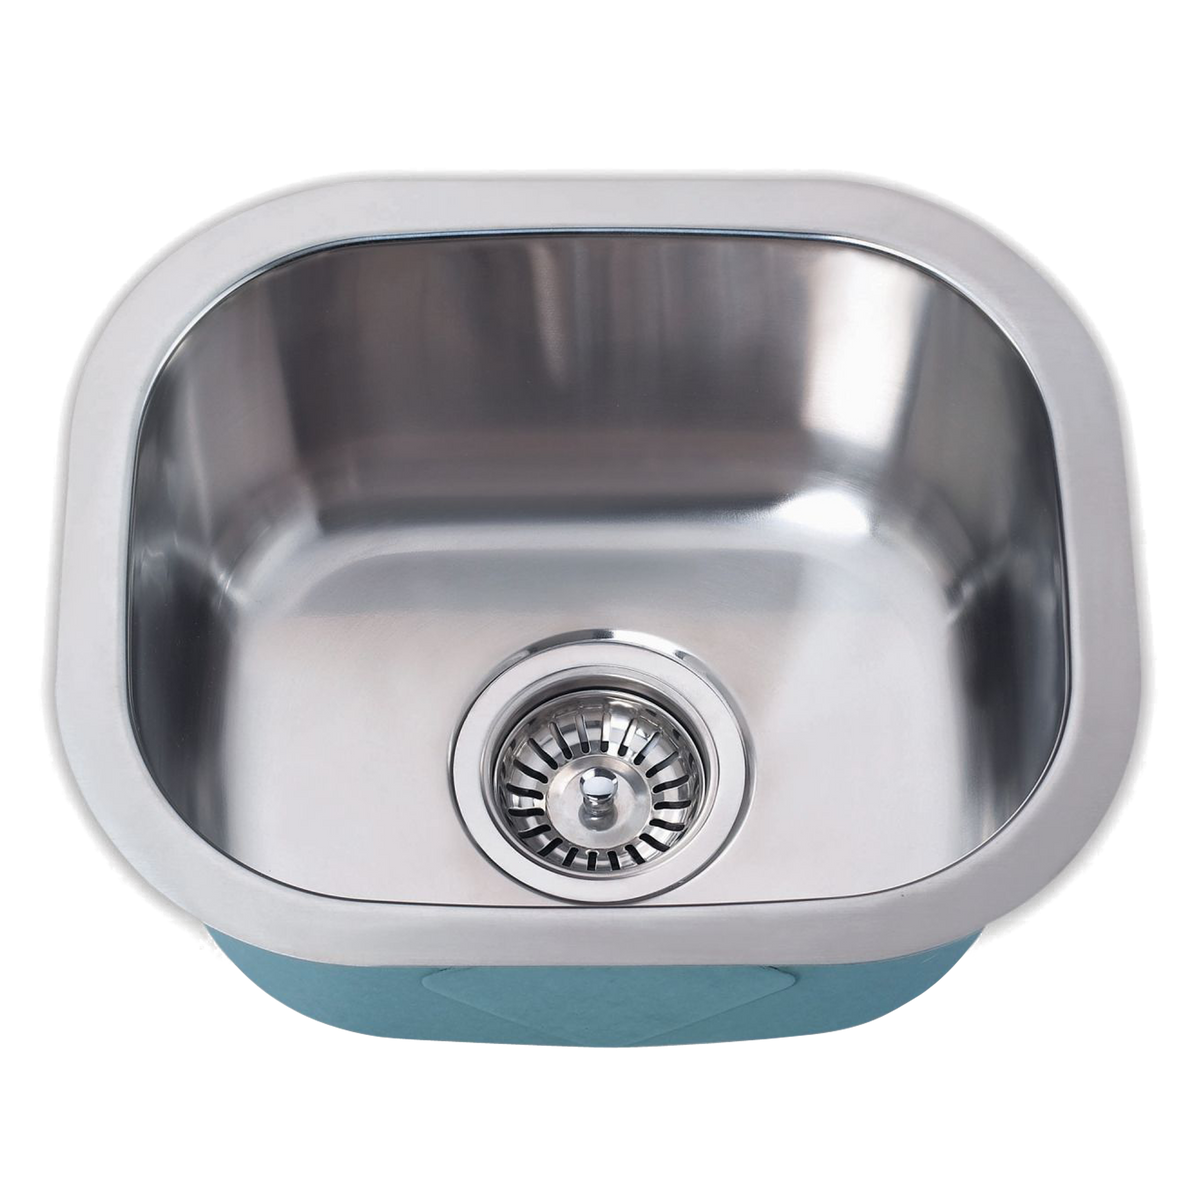 Shore Bar Sink - Stainless Steel